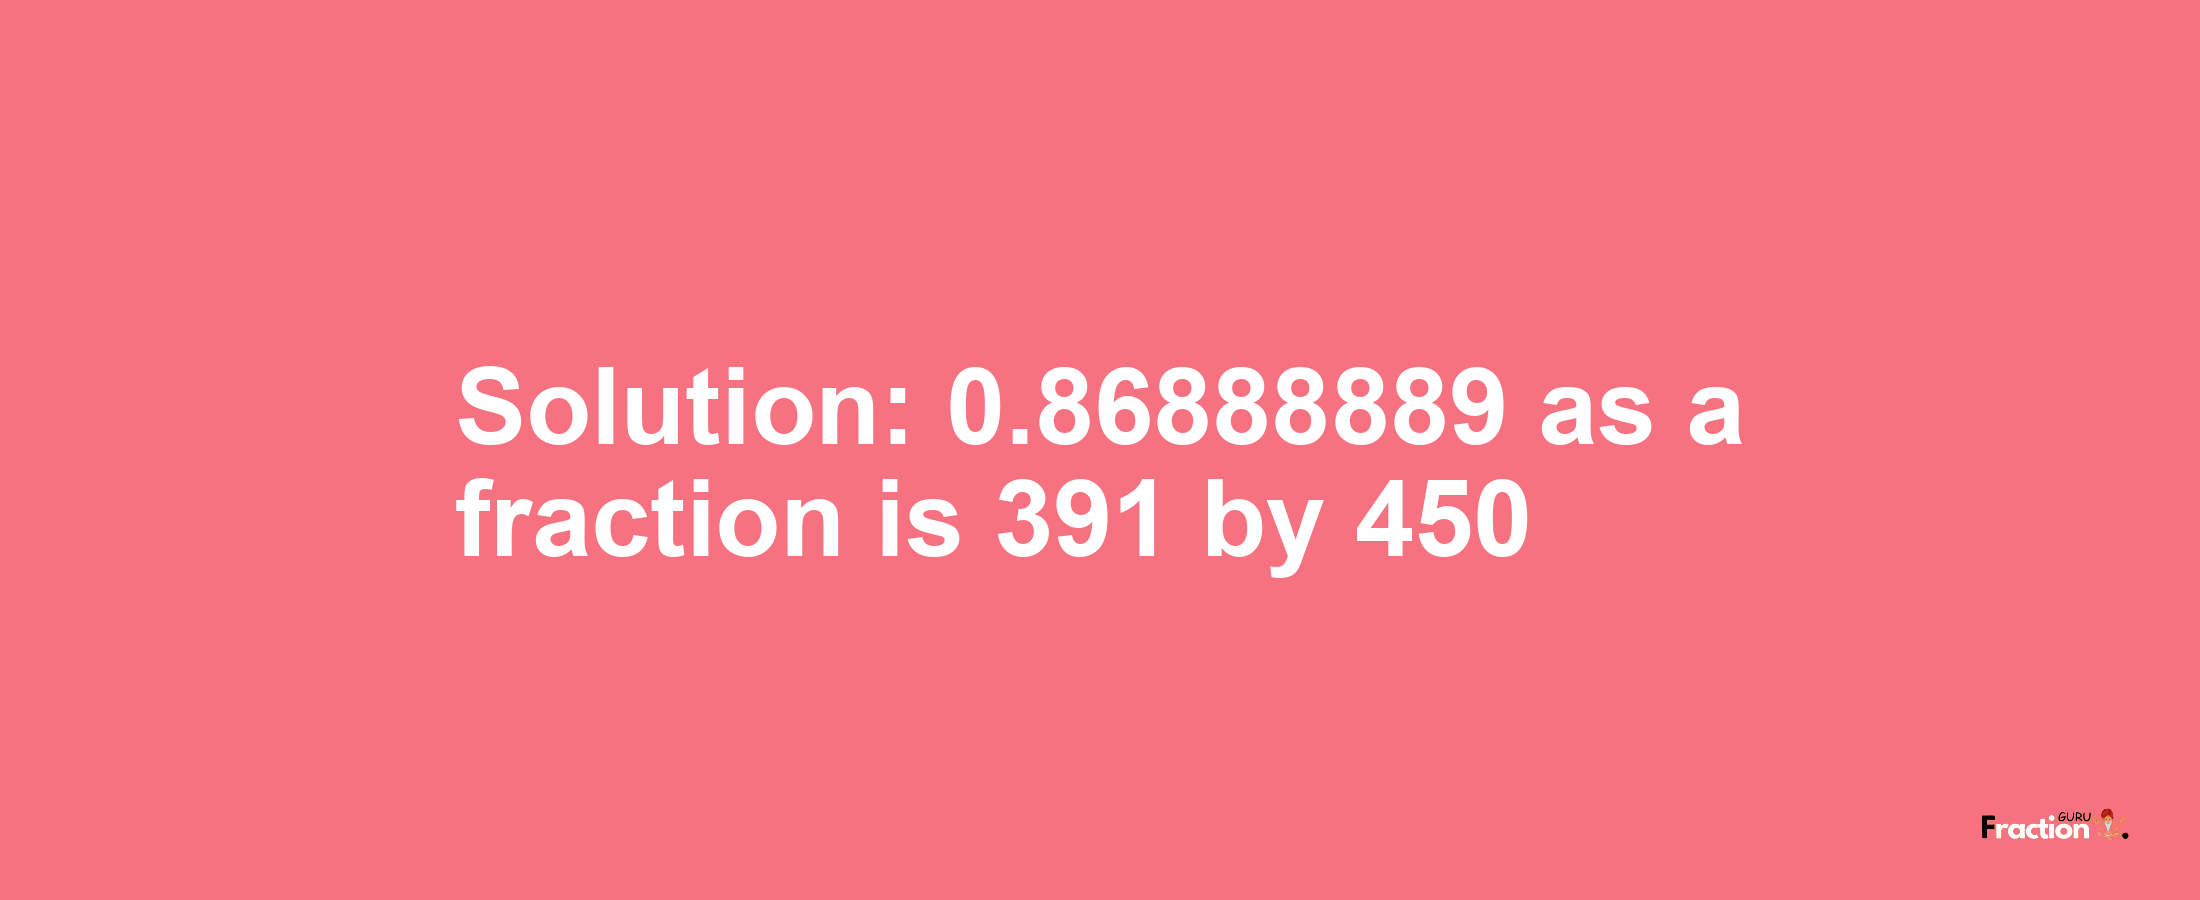 Solution:0.86888889 as a fraction is 391/450